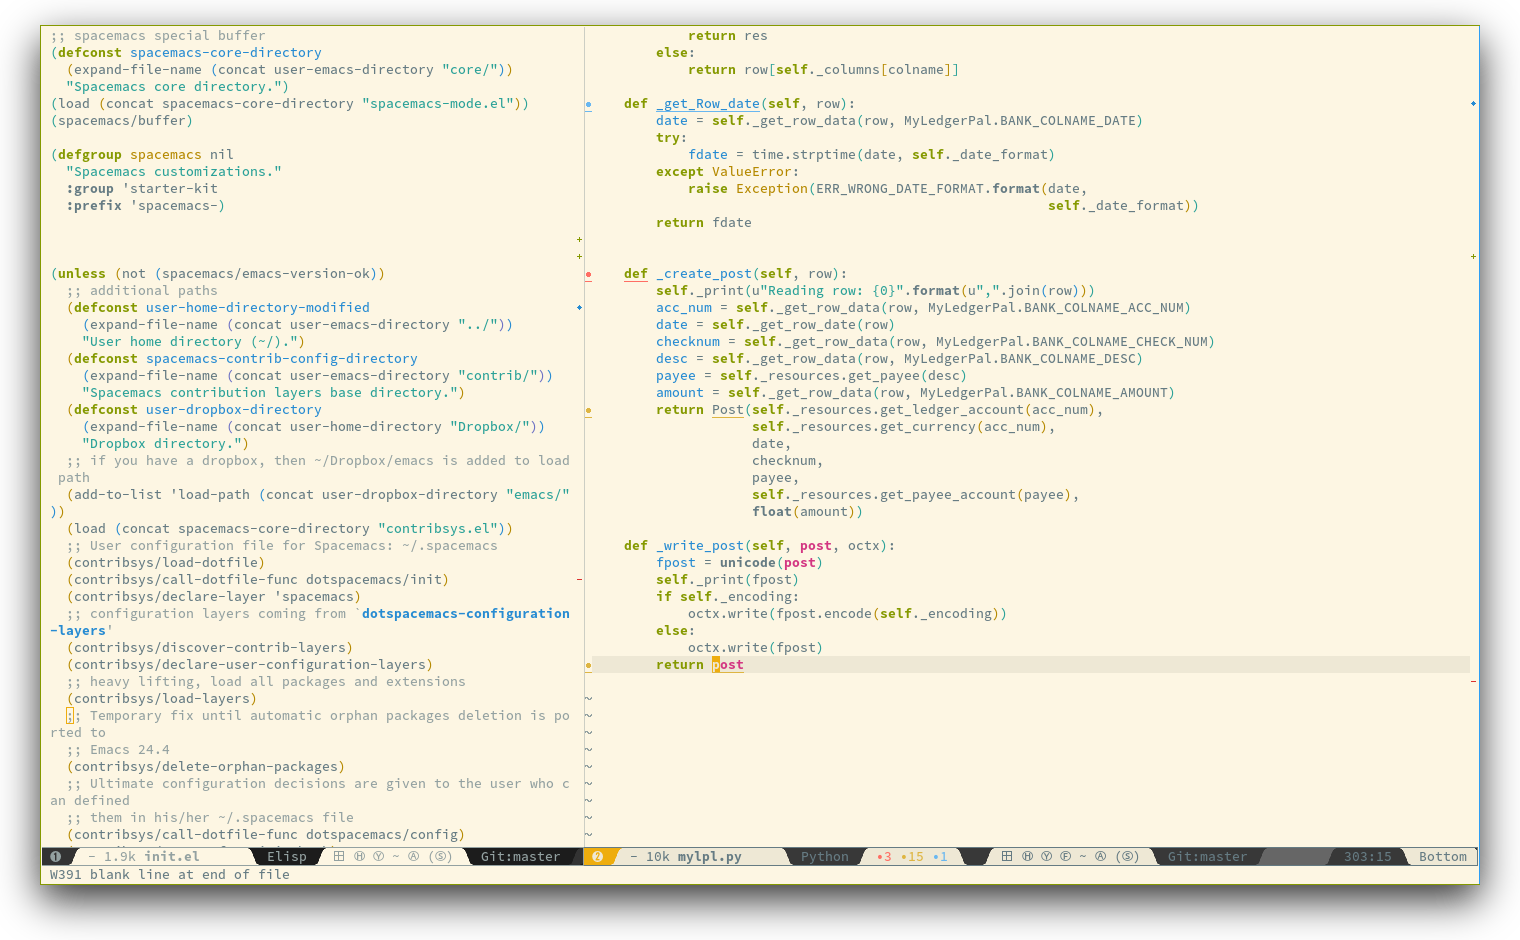 /TakeV/spacemacs/media/commit/fef908acad9406ea89263886c58d69c24a3c25a9/doc/img/spacemacs-python.png